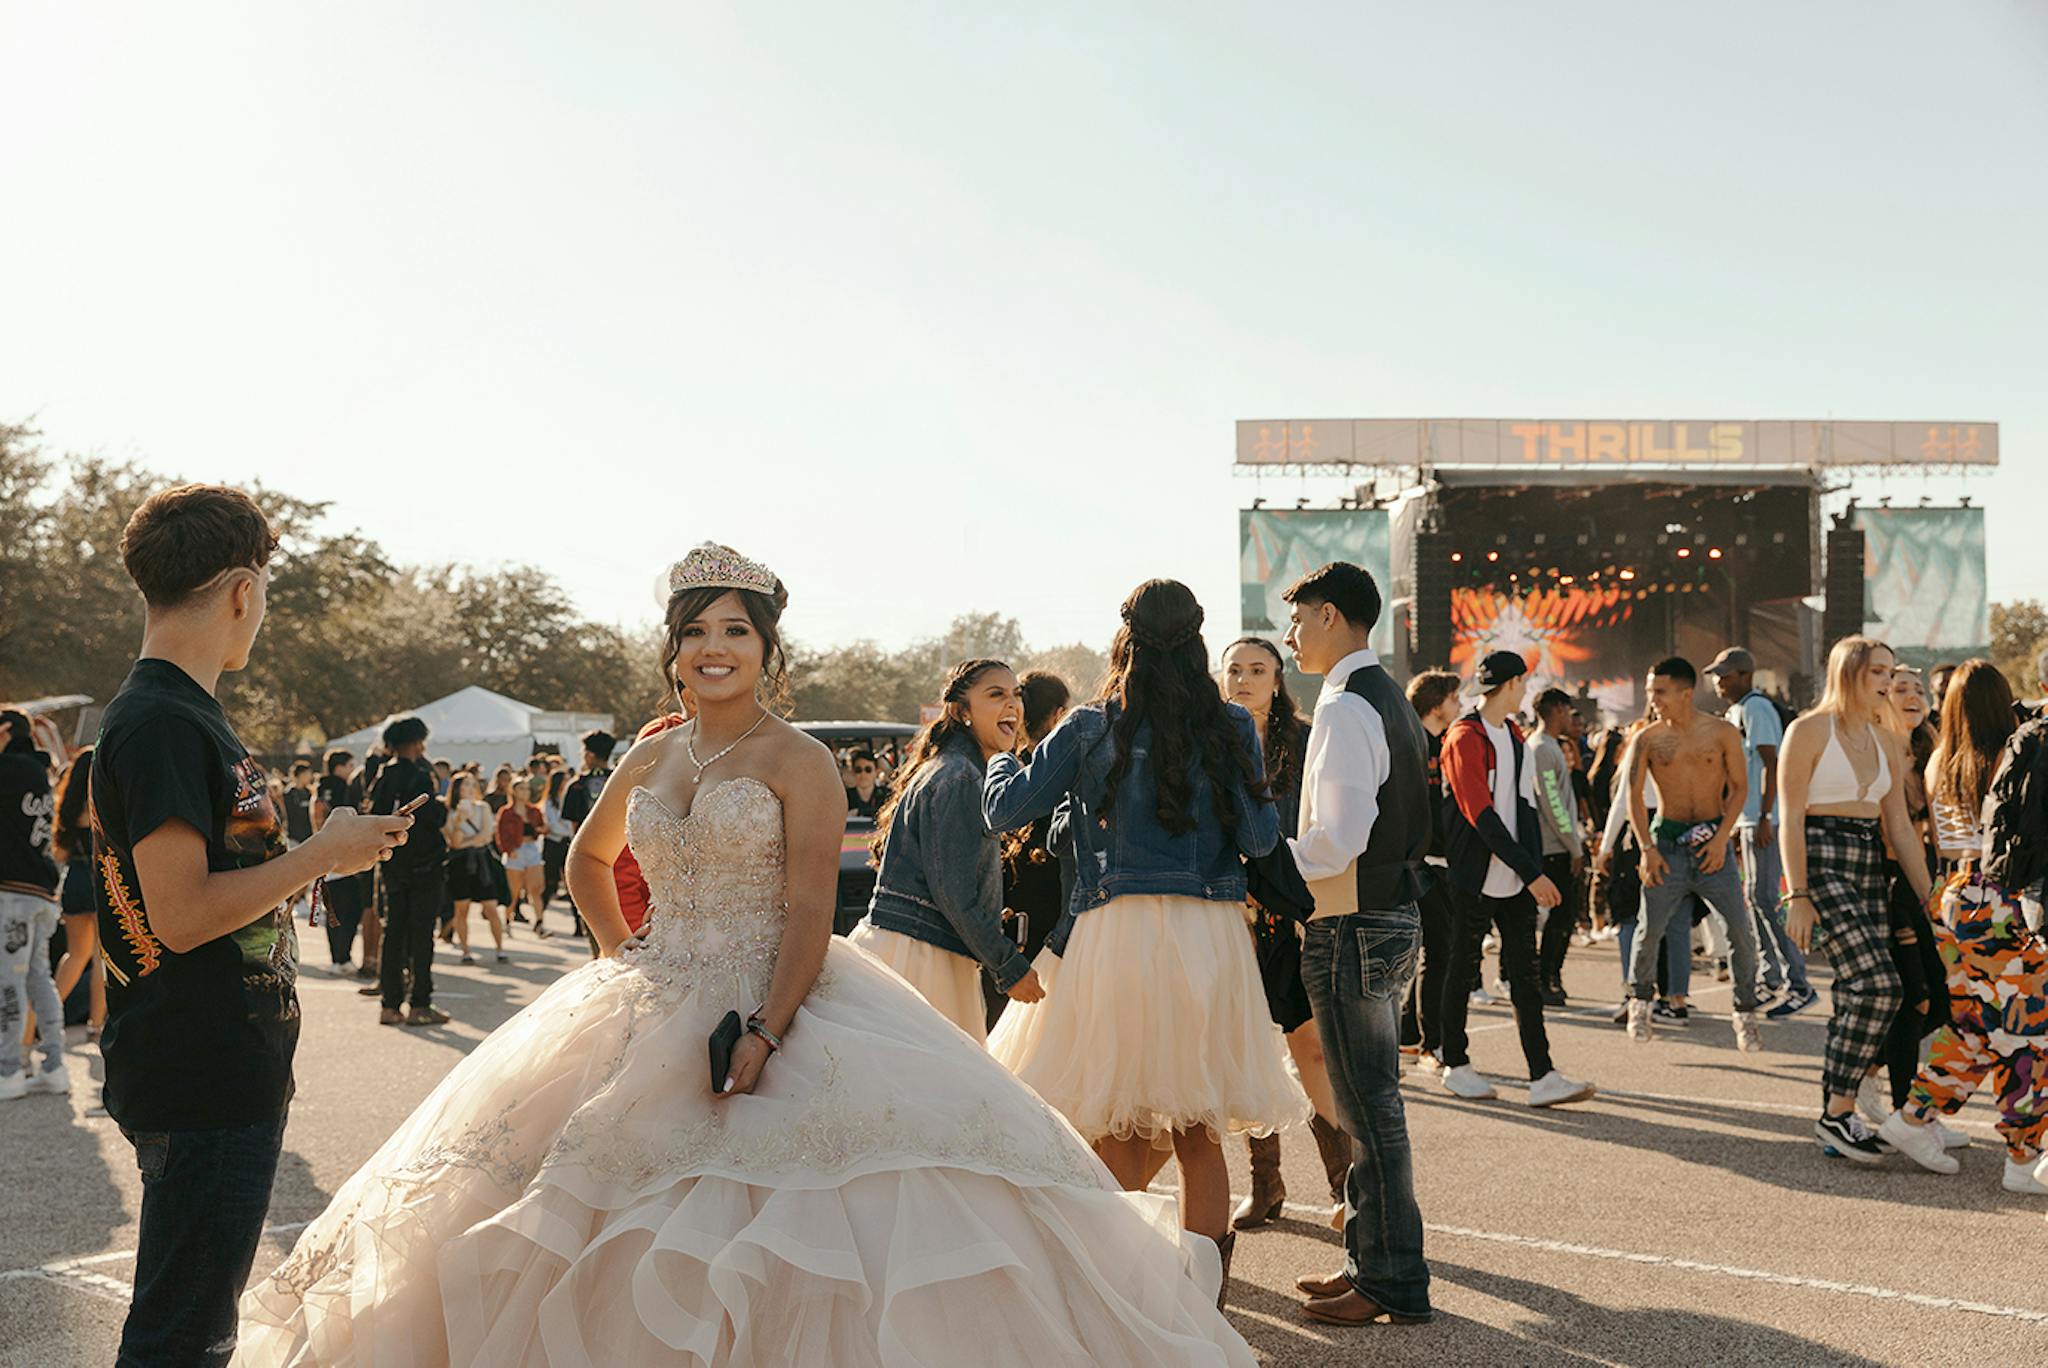 A girl in her quinceñera dress in front of a stage at Astroworld.